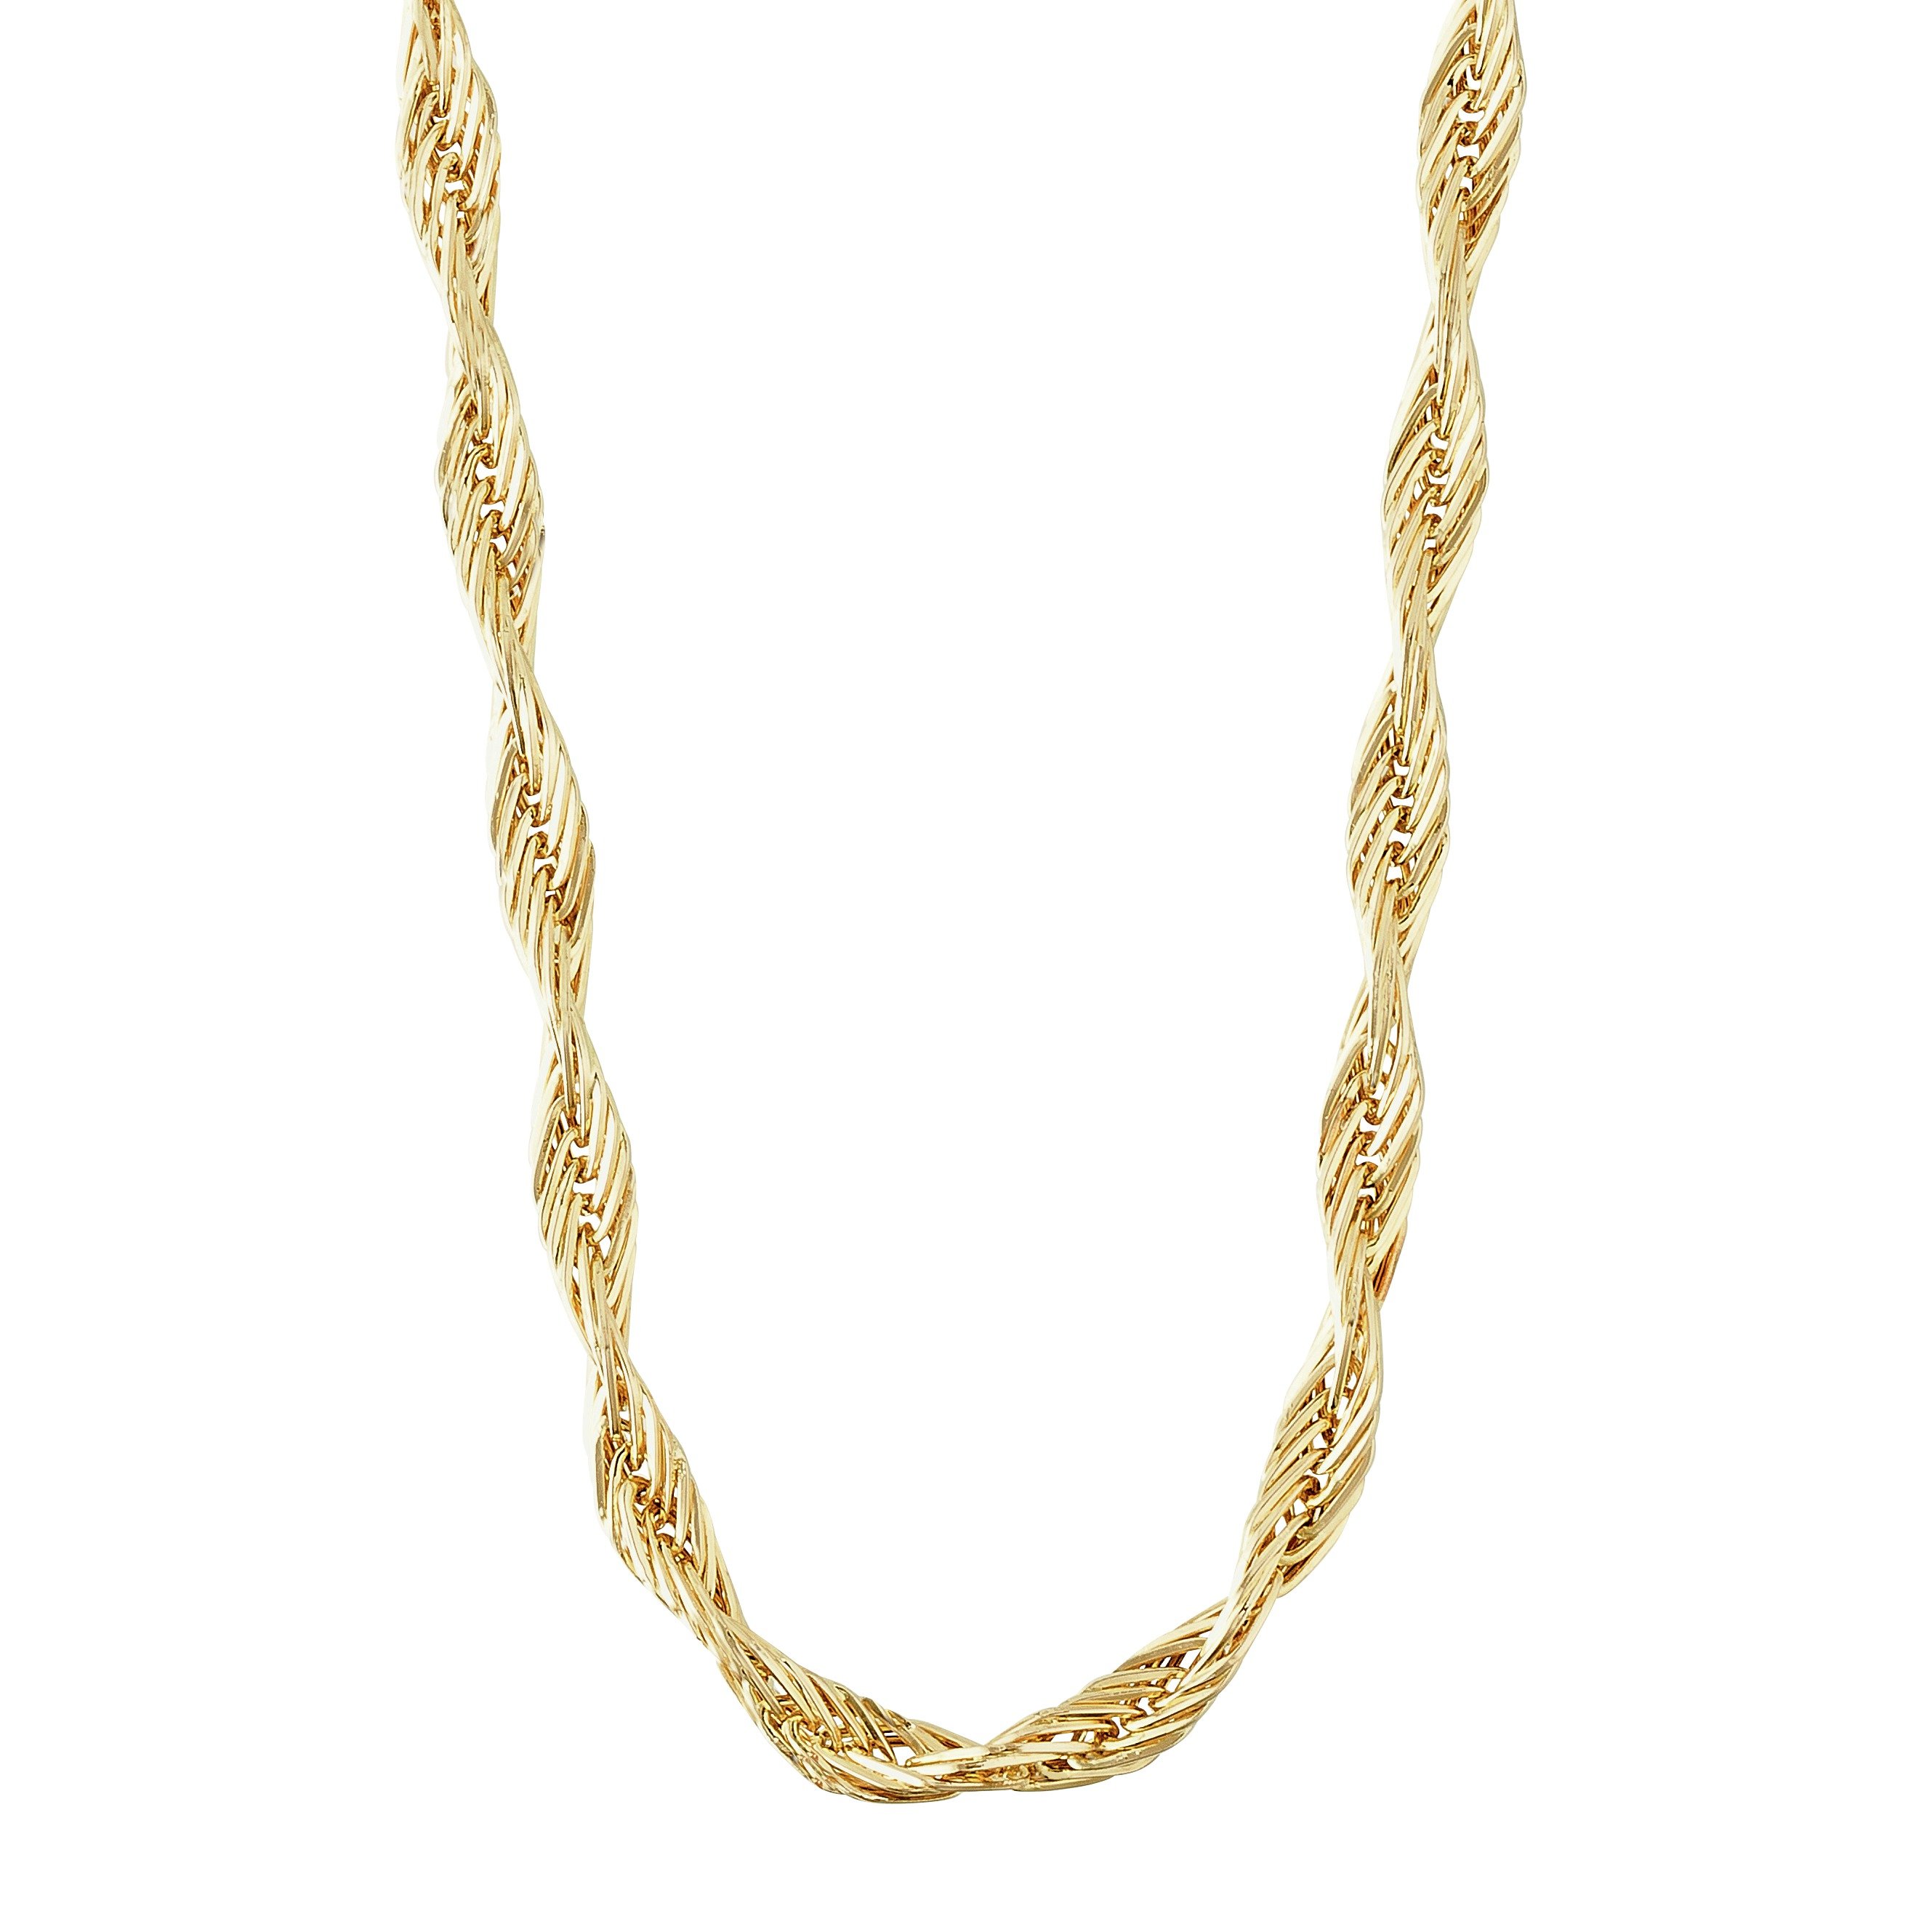 Revere 9ct Gold Twist Design Chain 18 Inch Necklace Review